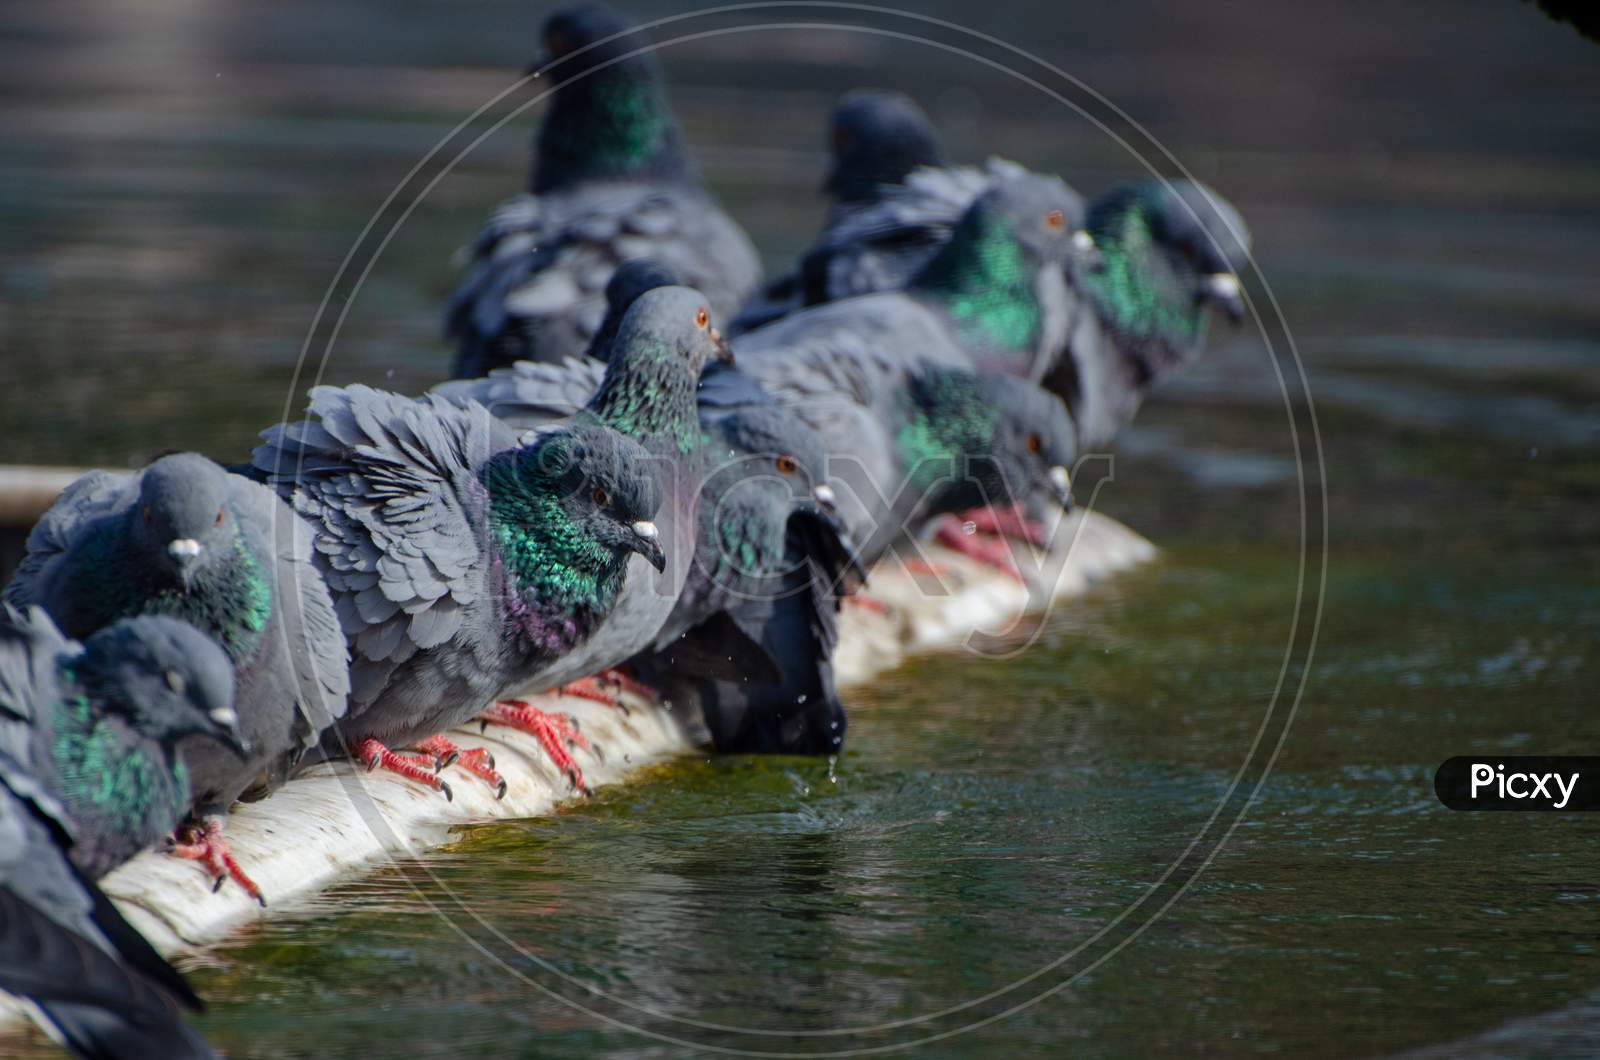 Flock of pigeons by the pond water